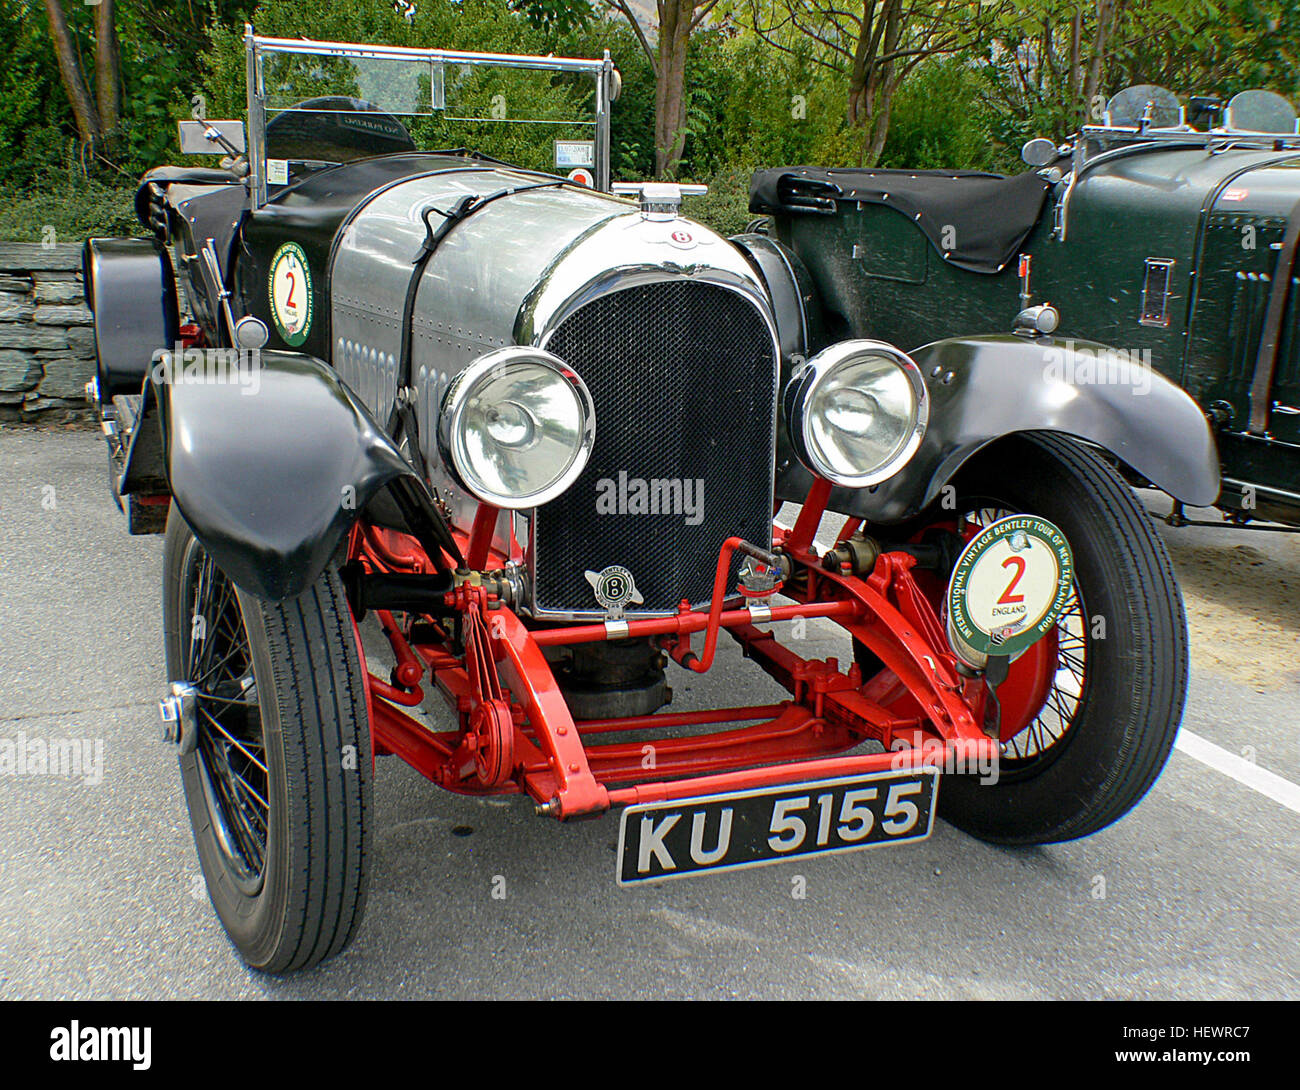 The Bentley 3 Litre was a sports car based on a rolling chassis by Bentley. The 3 Litre was Bentley's first car. Introduced in 1919, the 3 Litre chassis was made available to customers' coachbuilders from 1921 to 1929. It was for a large car compared to the tiny, lightweight Bugattis then dominating racing, but its innovative technology and strength made up for its weight. The 4000 lb (1800 kg) car won the 24 Hours of Le Mans in 1924, with drivers John Duff and Frank Clement, and again in 1927, this time in Super Sports form, with drivers S. C. H. &quot;Sammy&quot; Davis and Dudley Benjafield. Stock Photo